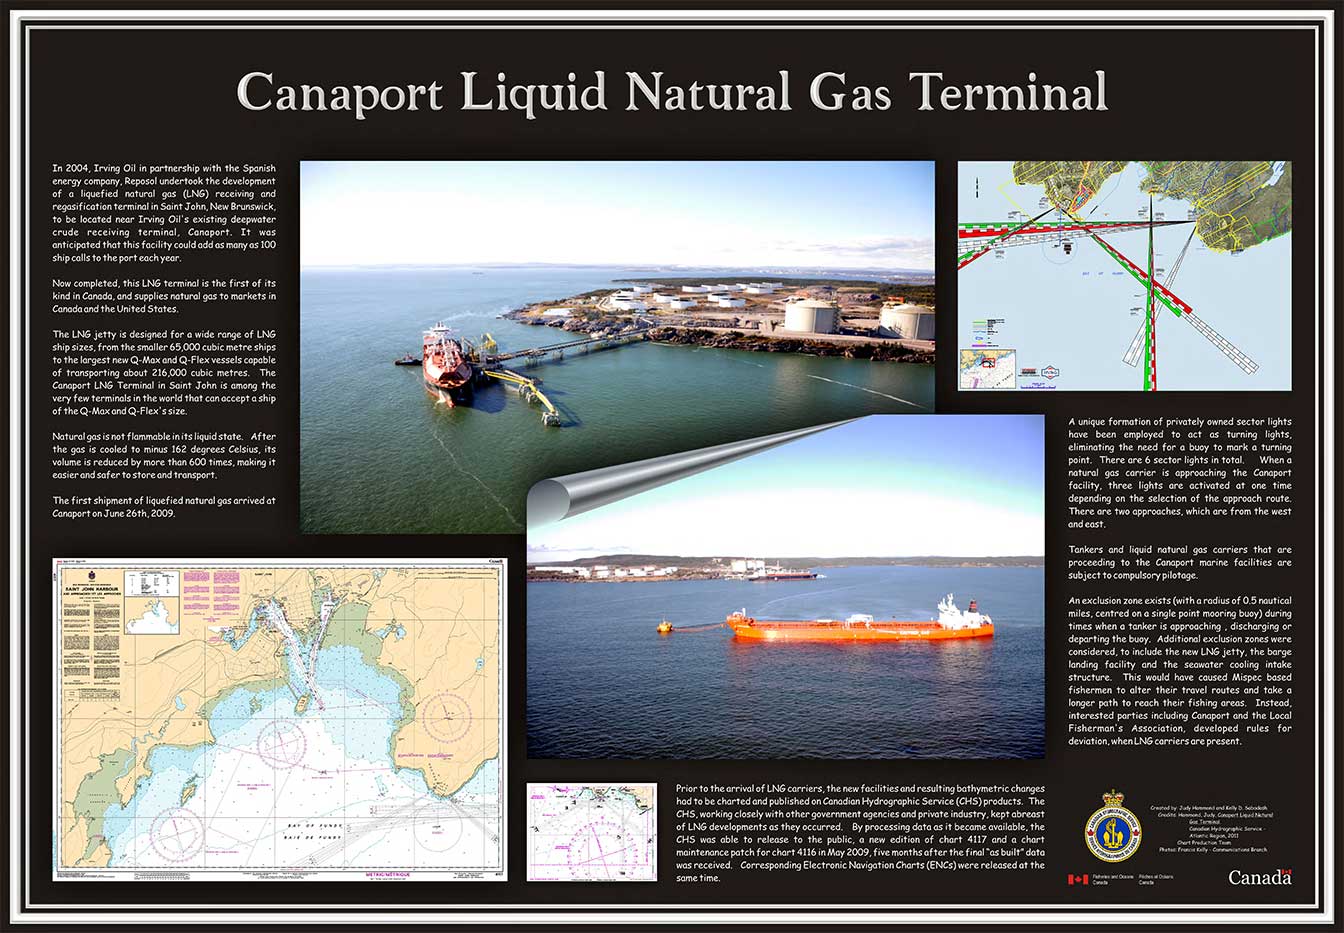 Infographic: Canaport Liquid Natural Gas Terminal